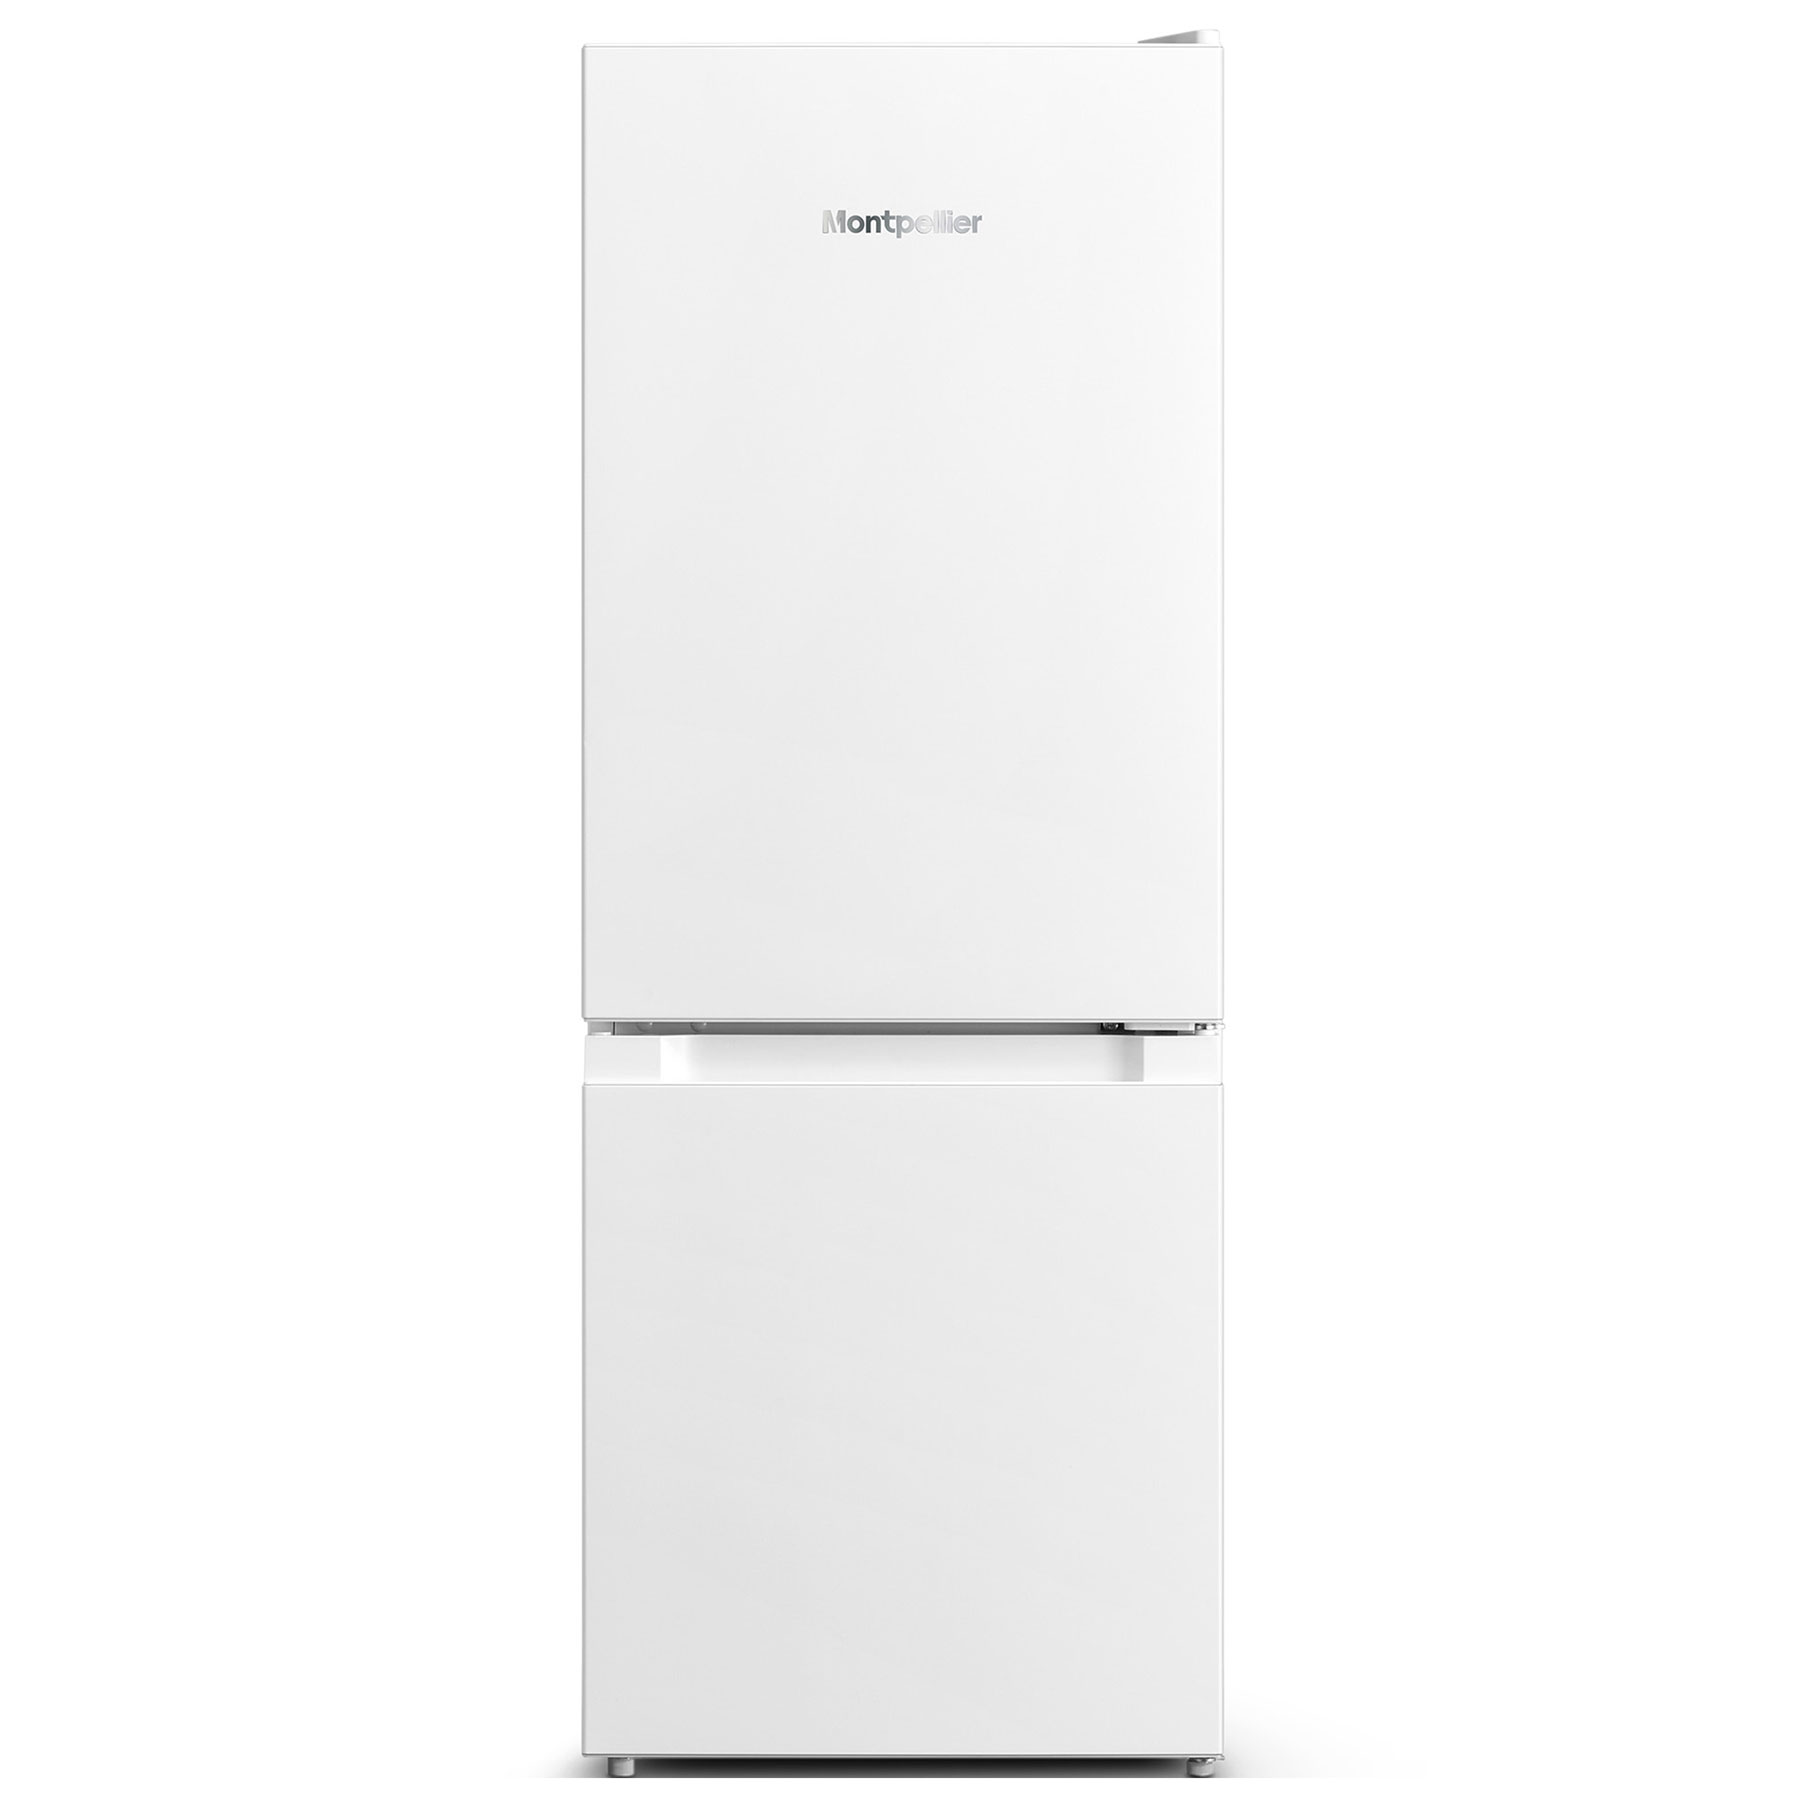 Montpellier MS125W 47cm Fridge Freezer in White 1 24m F Rated 91 42L